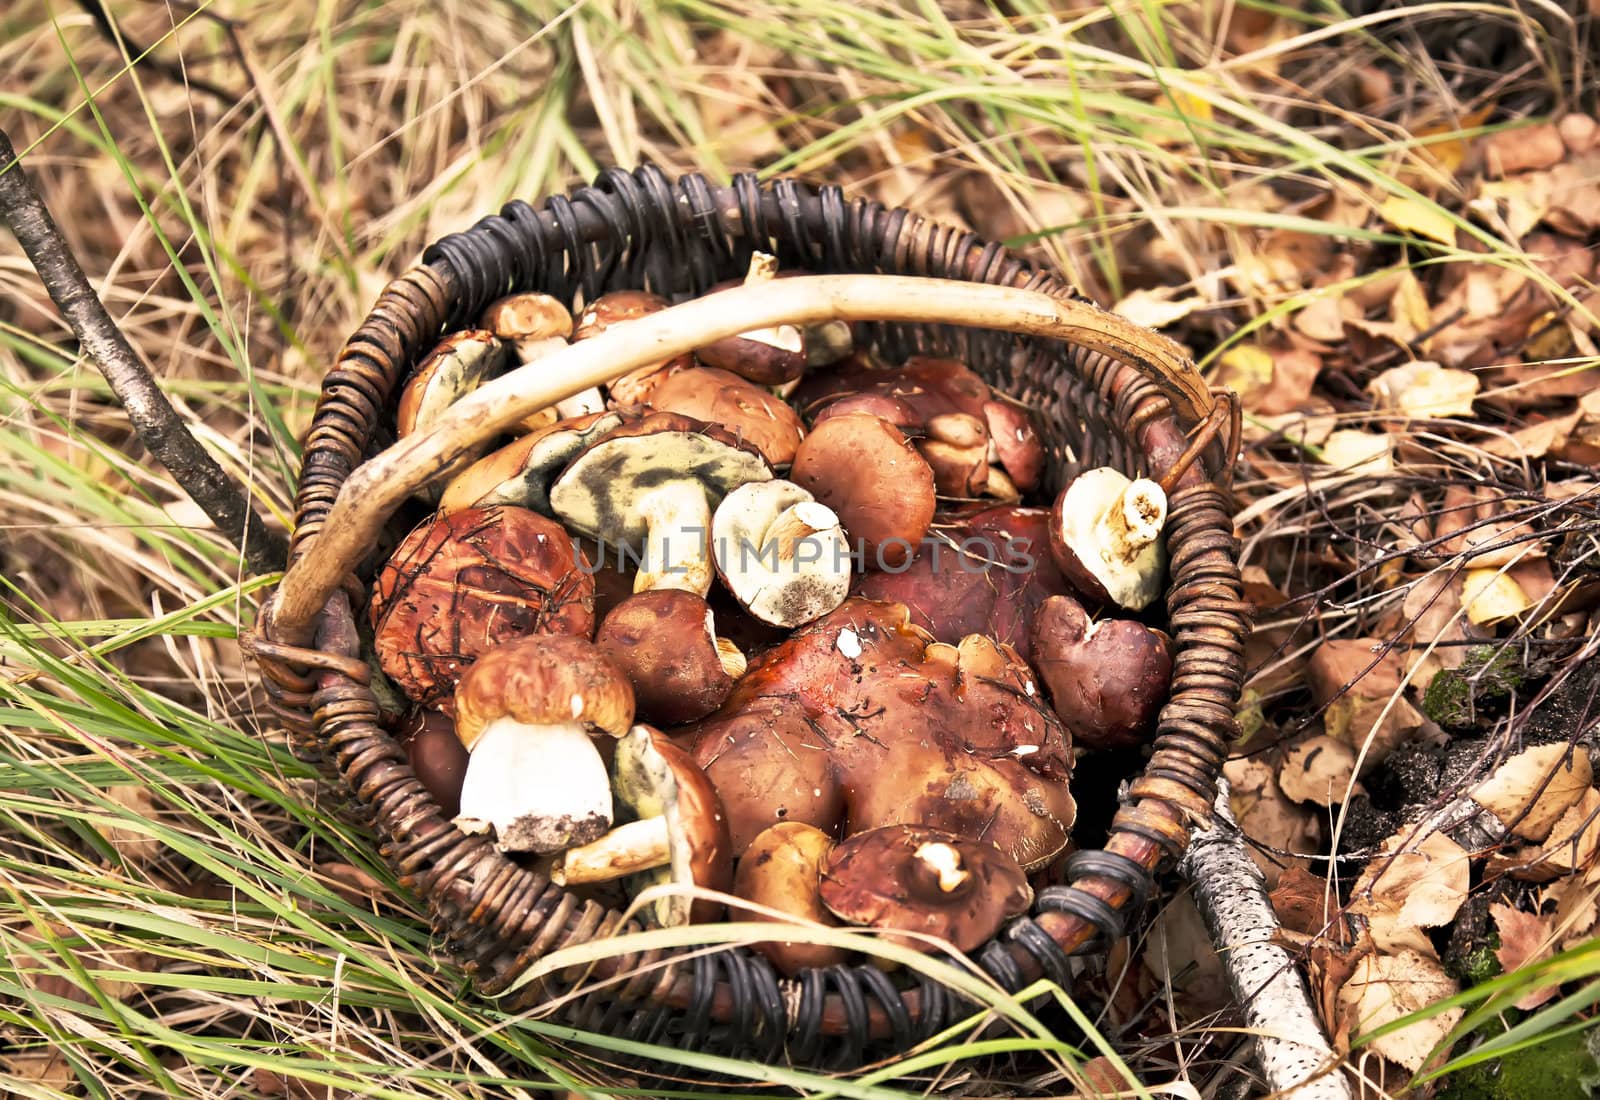 Basket with mushrooms in autumn forest